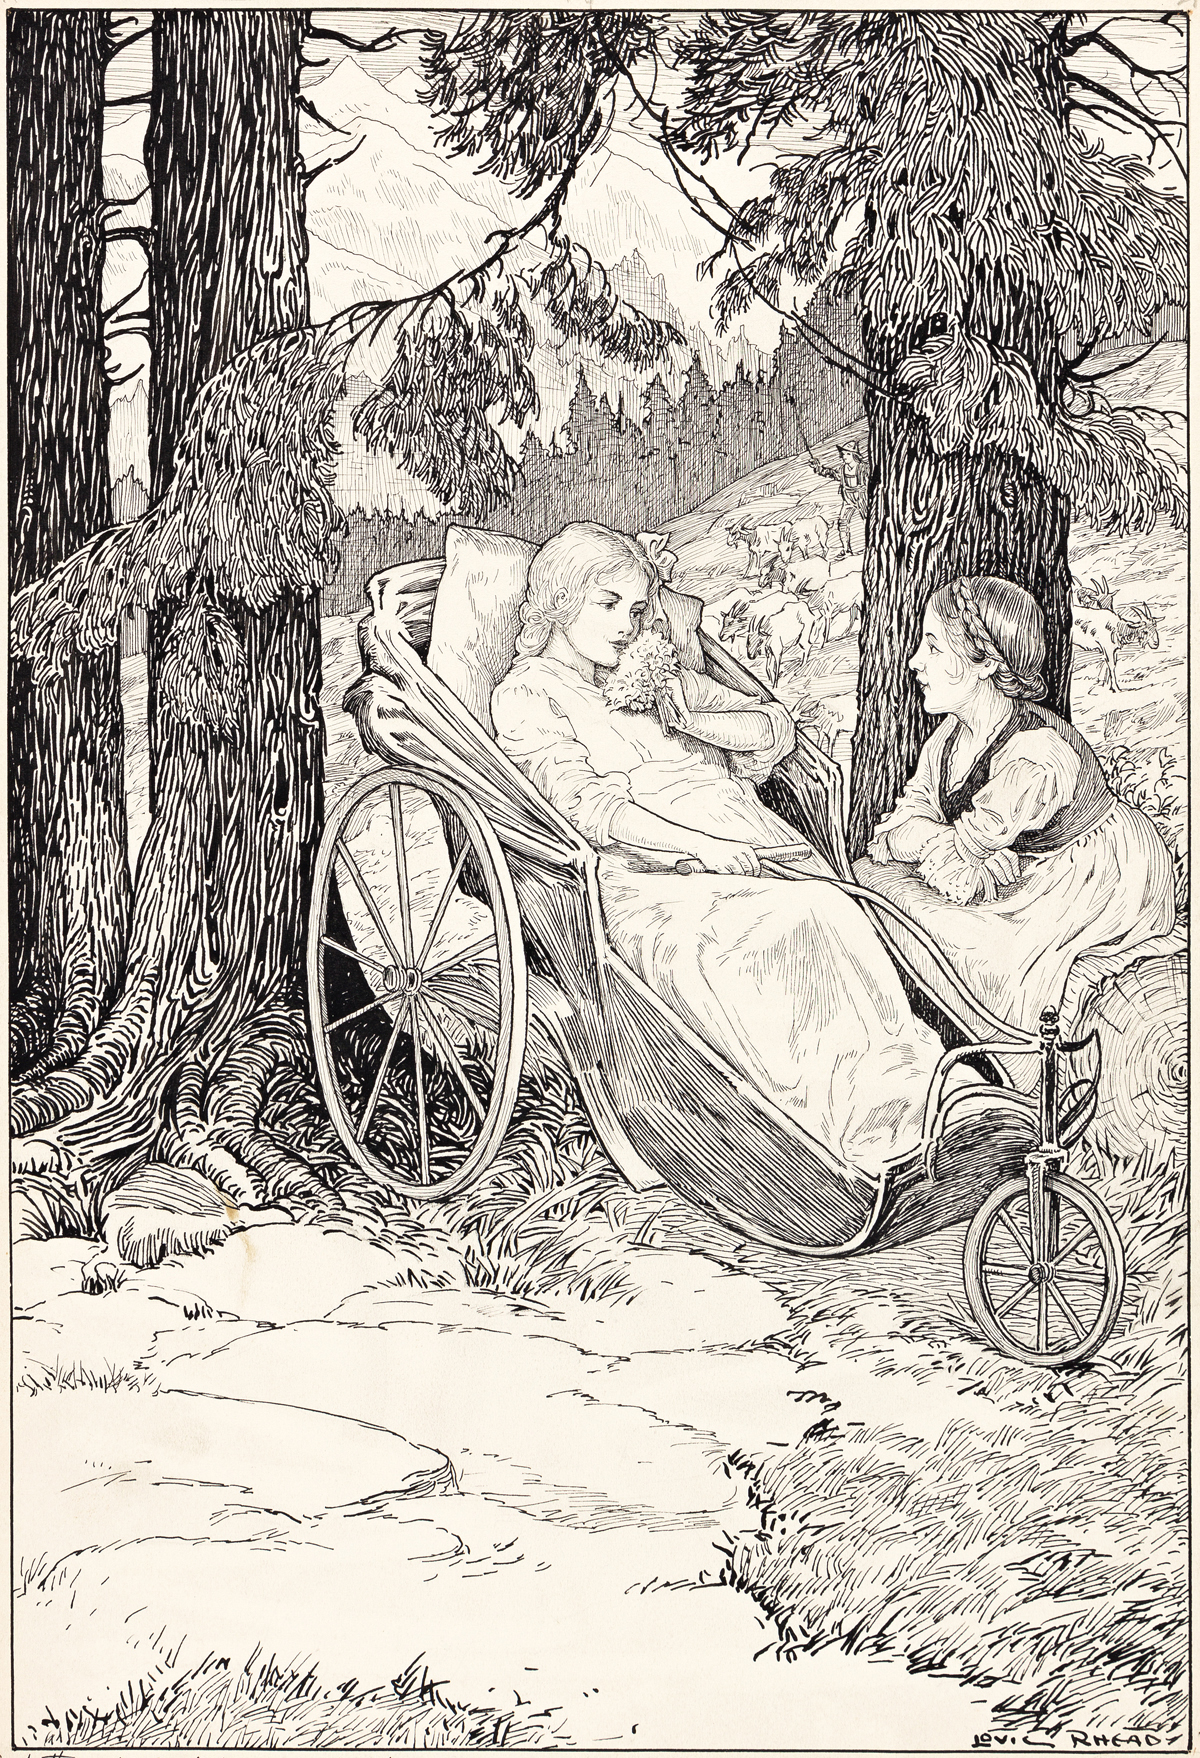 LOUIS RHEAD (1857-1926) So they sat and chatted under the trees. [CHILDRENS]